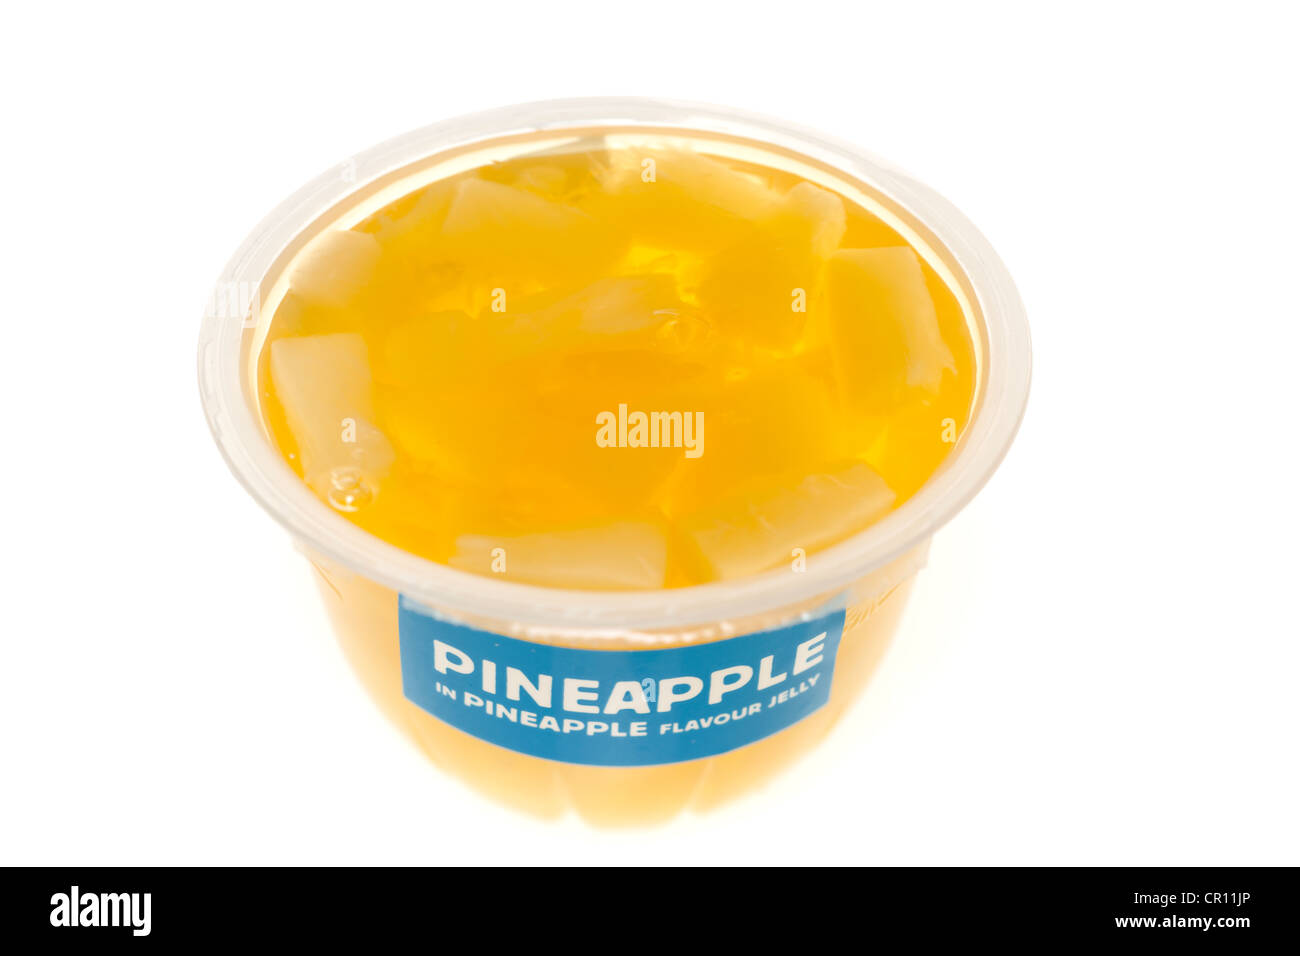 Pineapple in pineapple flavour jelly Stock Photo